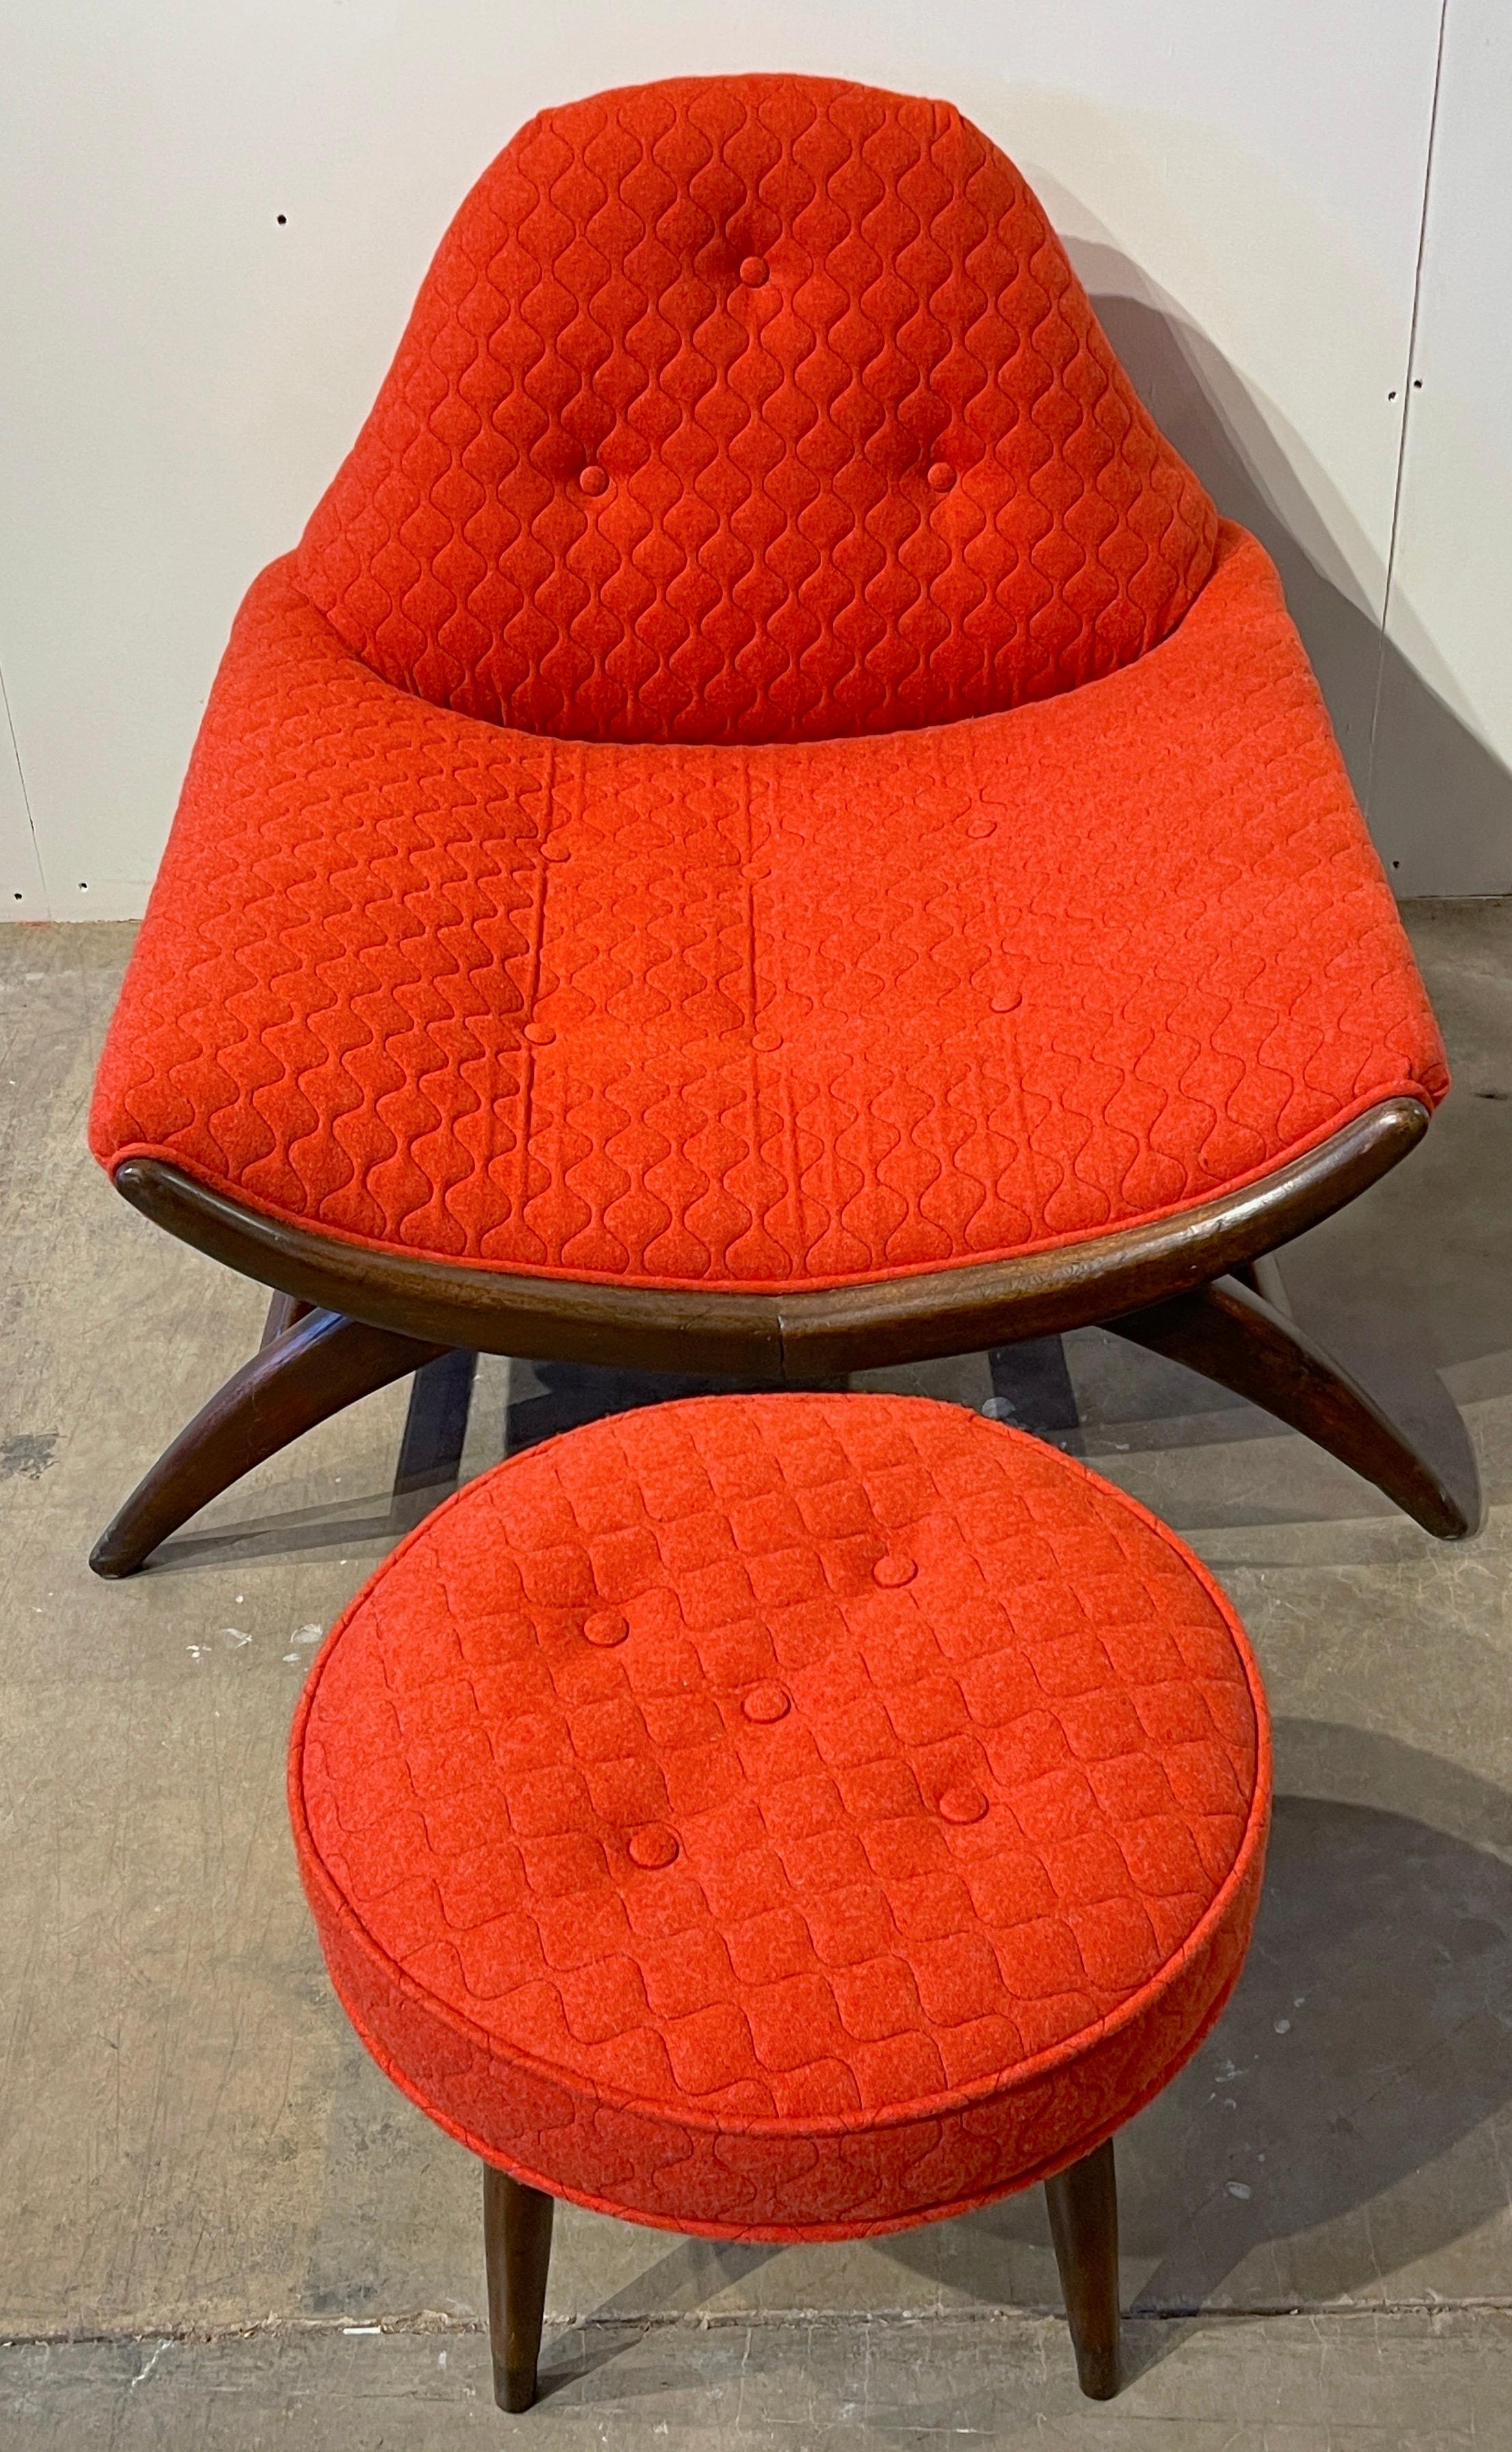 Adrian Pearsall Gondola club chair & ottoman, Newly Upholstered 
USA, Circa 1960s

A rare offering of the iconic Gondola Club Chair, and complimentary round ottoman/stool both designed by Adrian Pearsall. 
Displaying a combination of sculptural